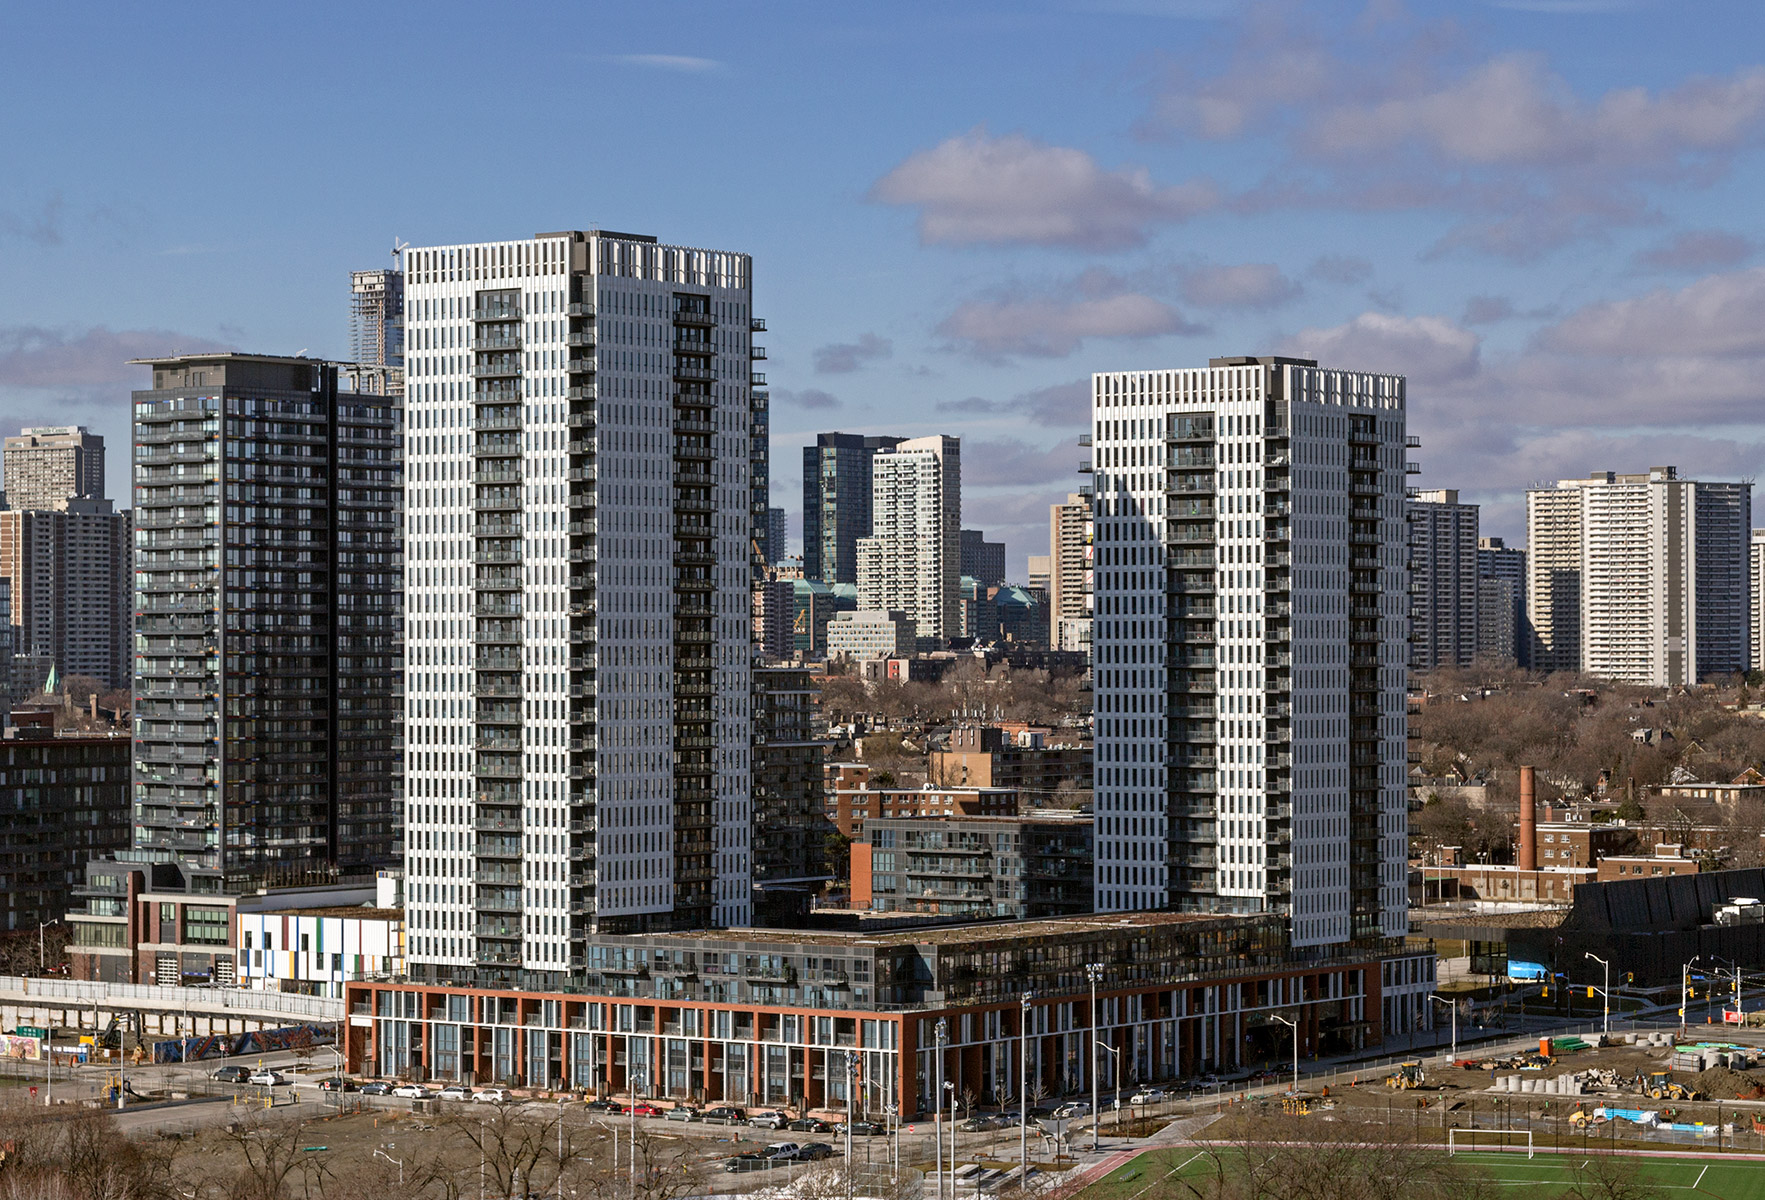 20160116. An aerial view of Regent Park’s white aluminum-cladd